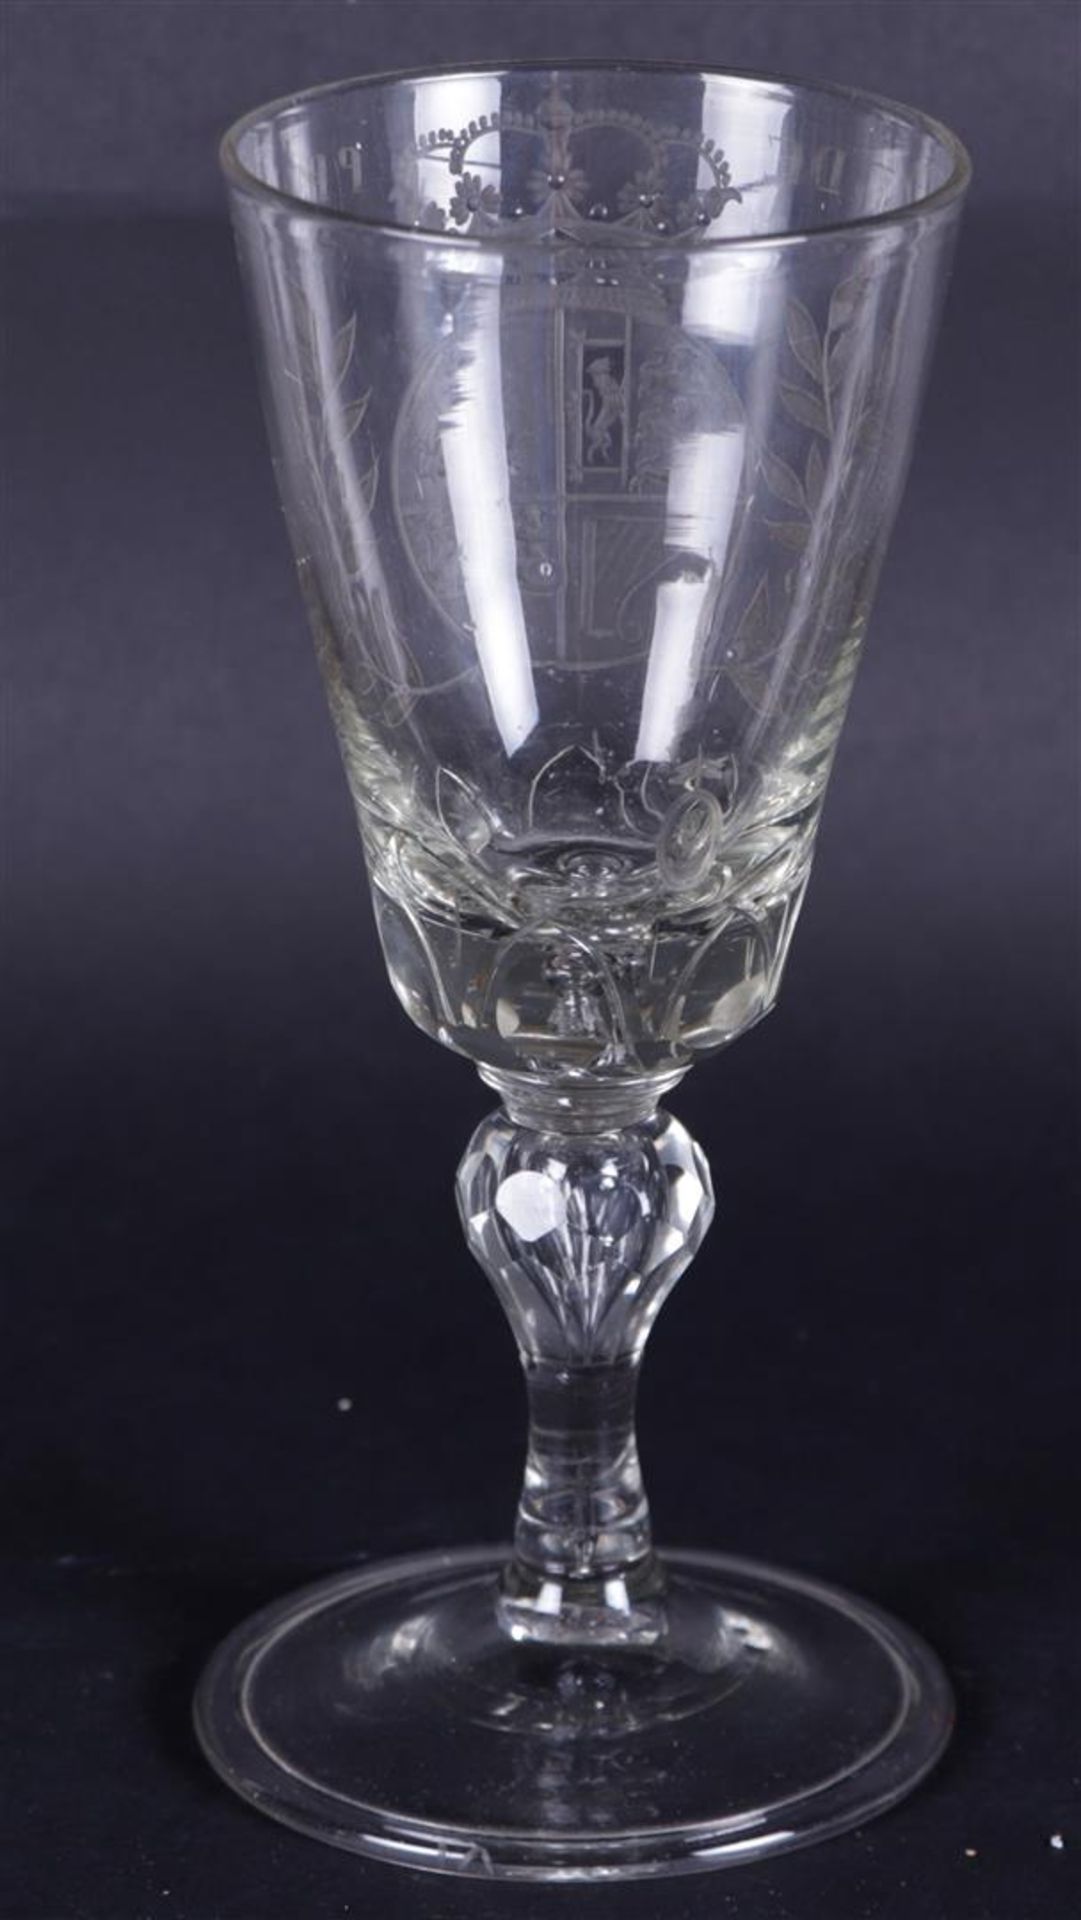 An etched wine glass with the English Royal coat of arms, above which the text "VIVAT DE PRINCES".
H - Image 4 of 5